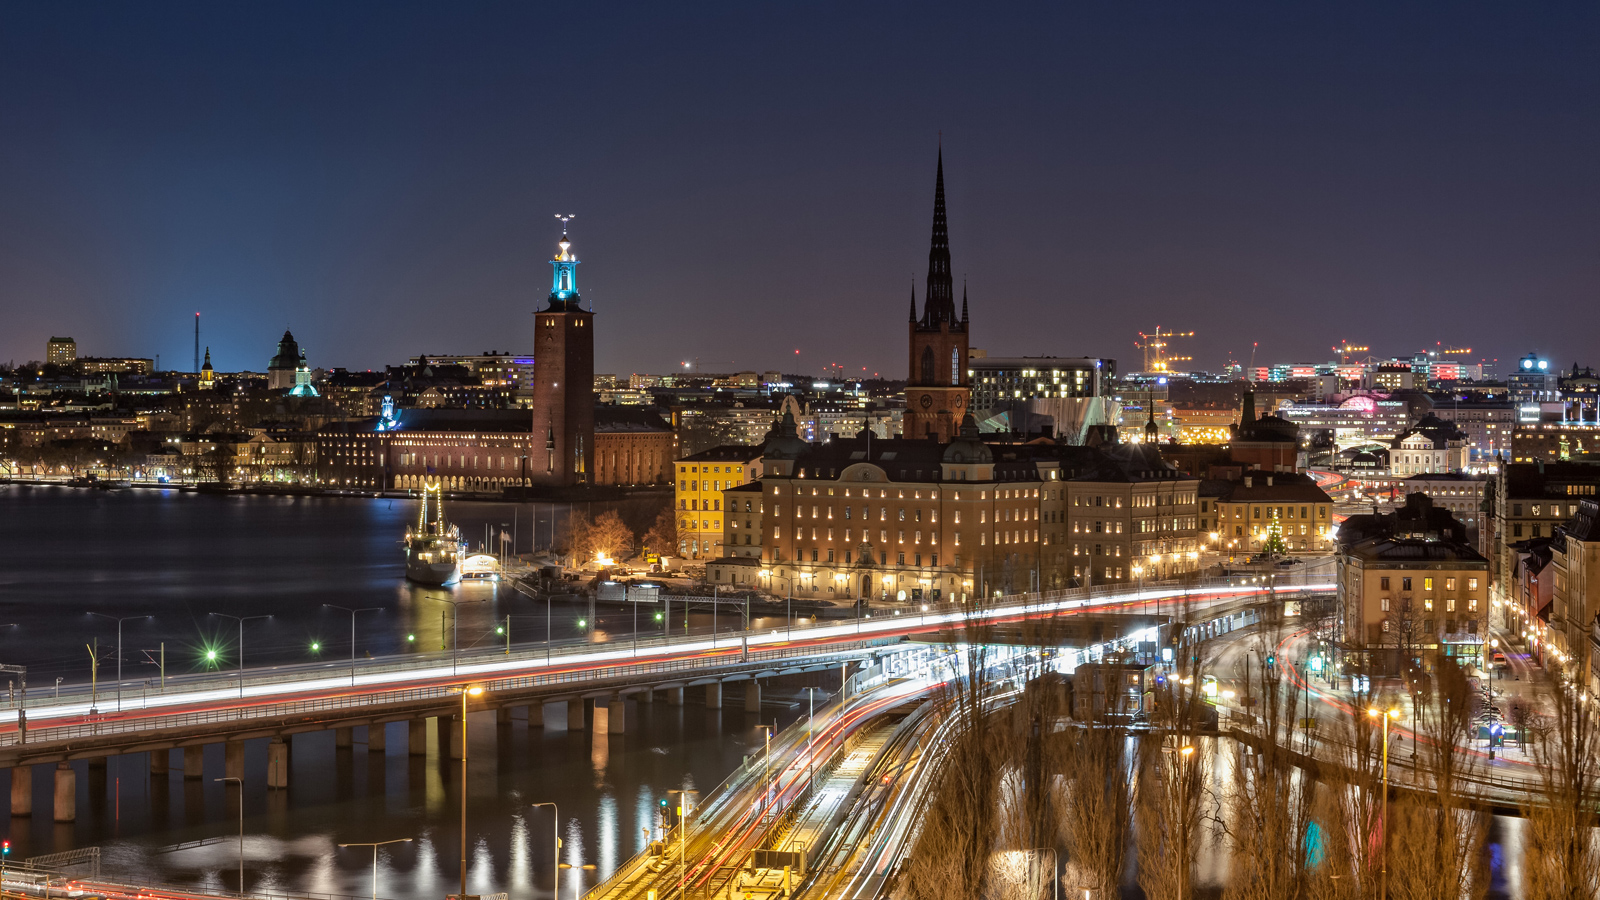 Where to walk in the evening in Stockholm?